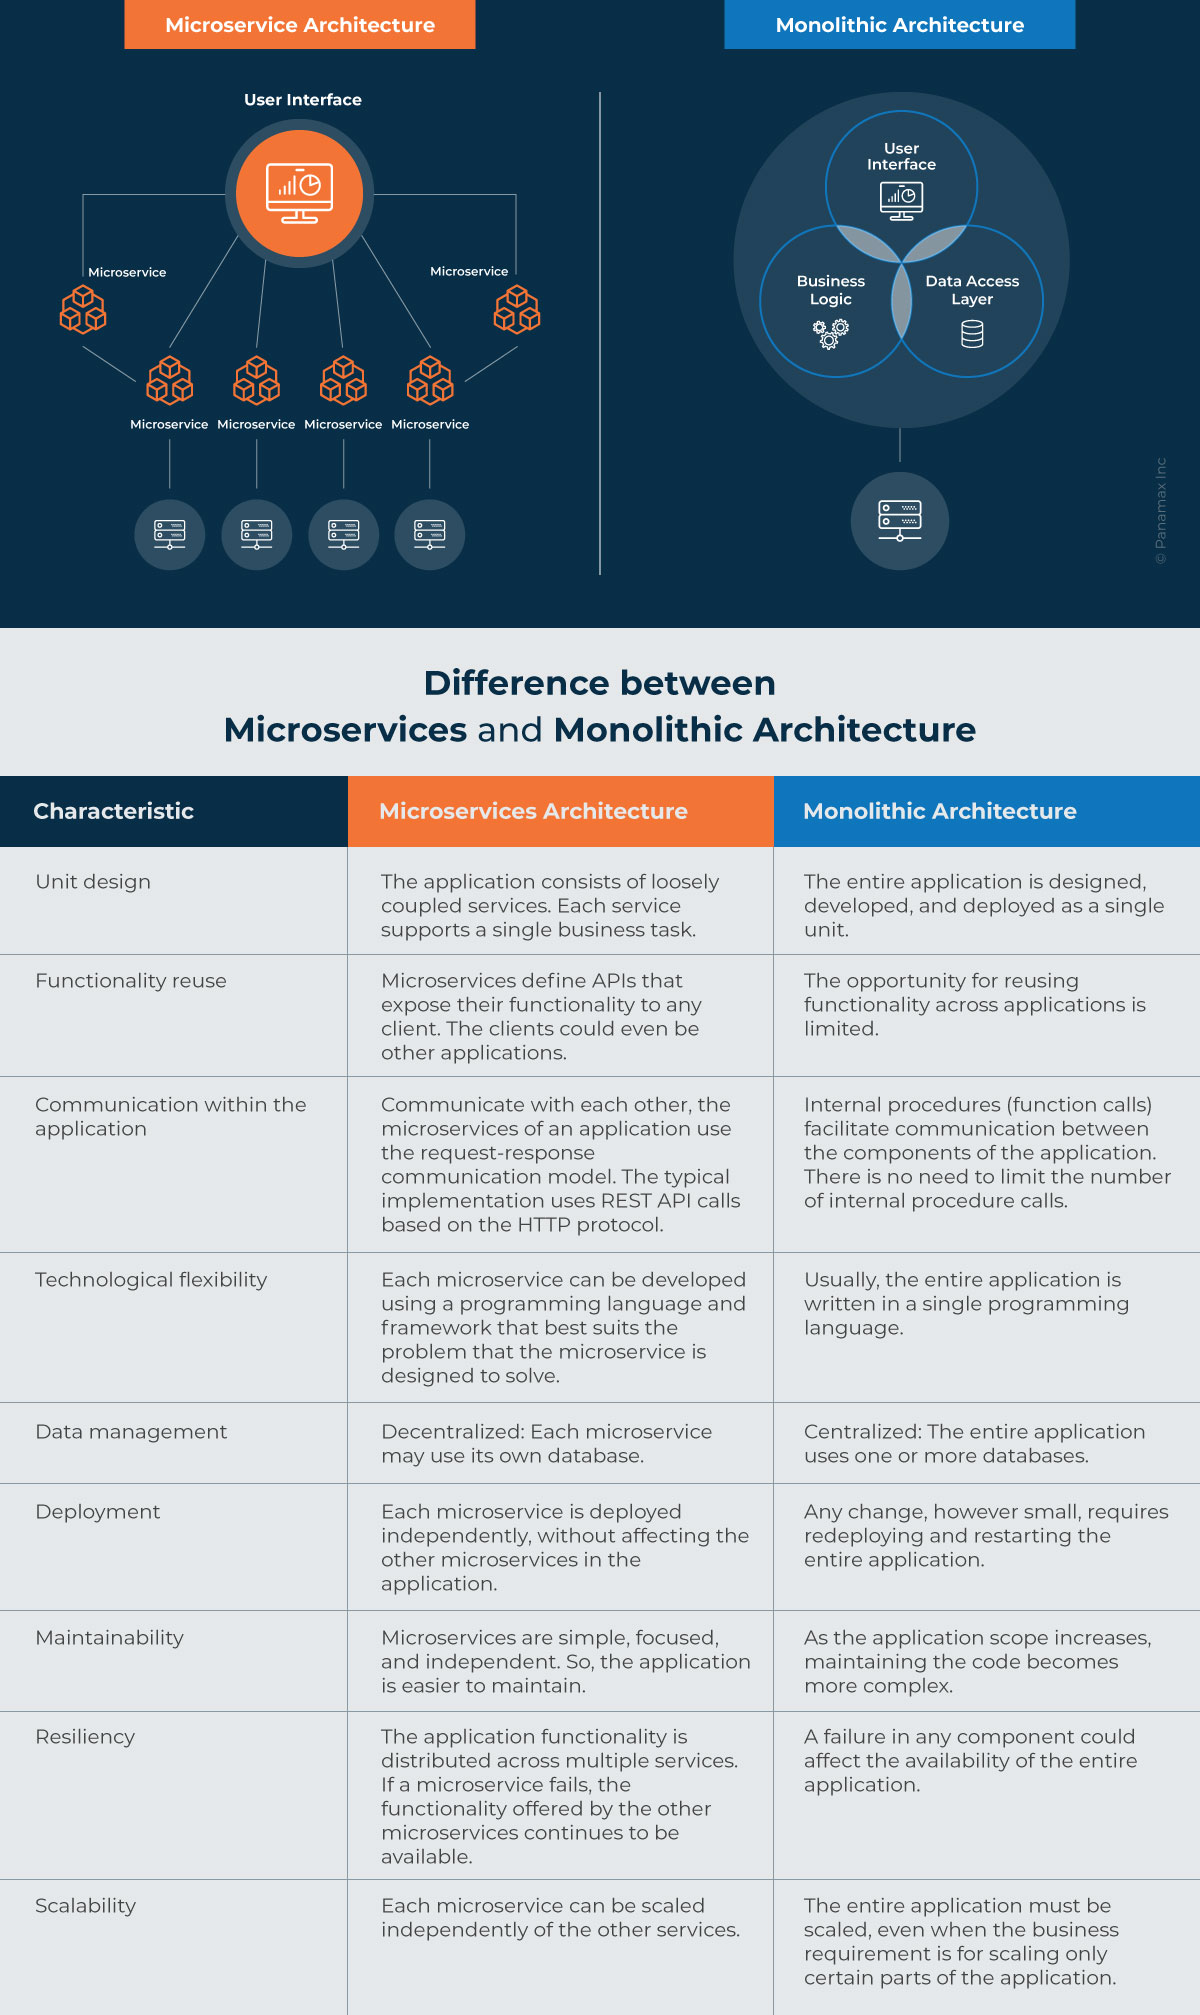 microservices and monolithic architecture difference